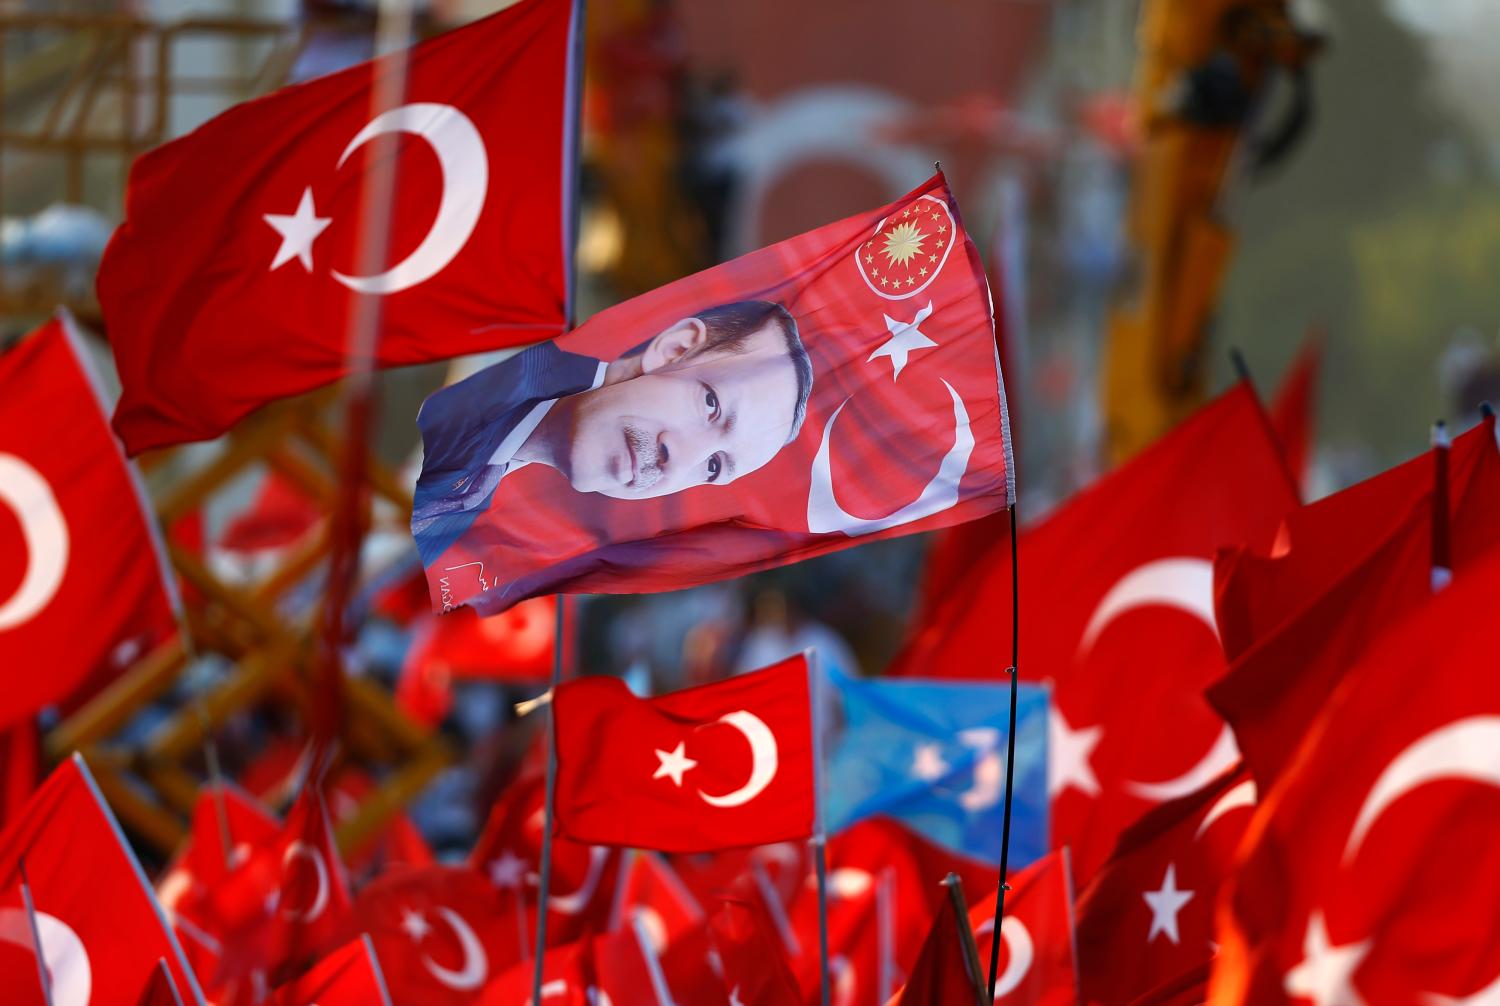 A flag with the picture of Turkey's President Tayyip Erdogan is seen during the Democracy and Martyrs Rally, organized by him and supported by ruling AK Party (AKP), oppositions Republican People's Party (CHP) and Nationalist Movement Party (MHP), to protest against last month's failed military coup attempt, in Istanbul, Turkey, August 7, 2016. REUTERS/Osman Orsal